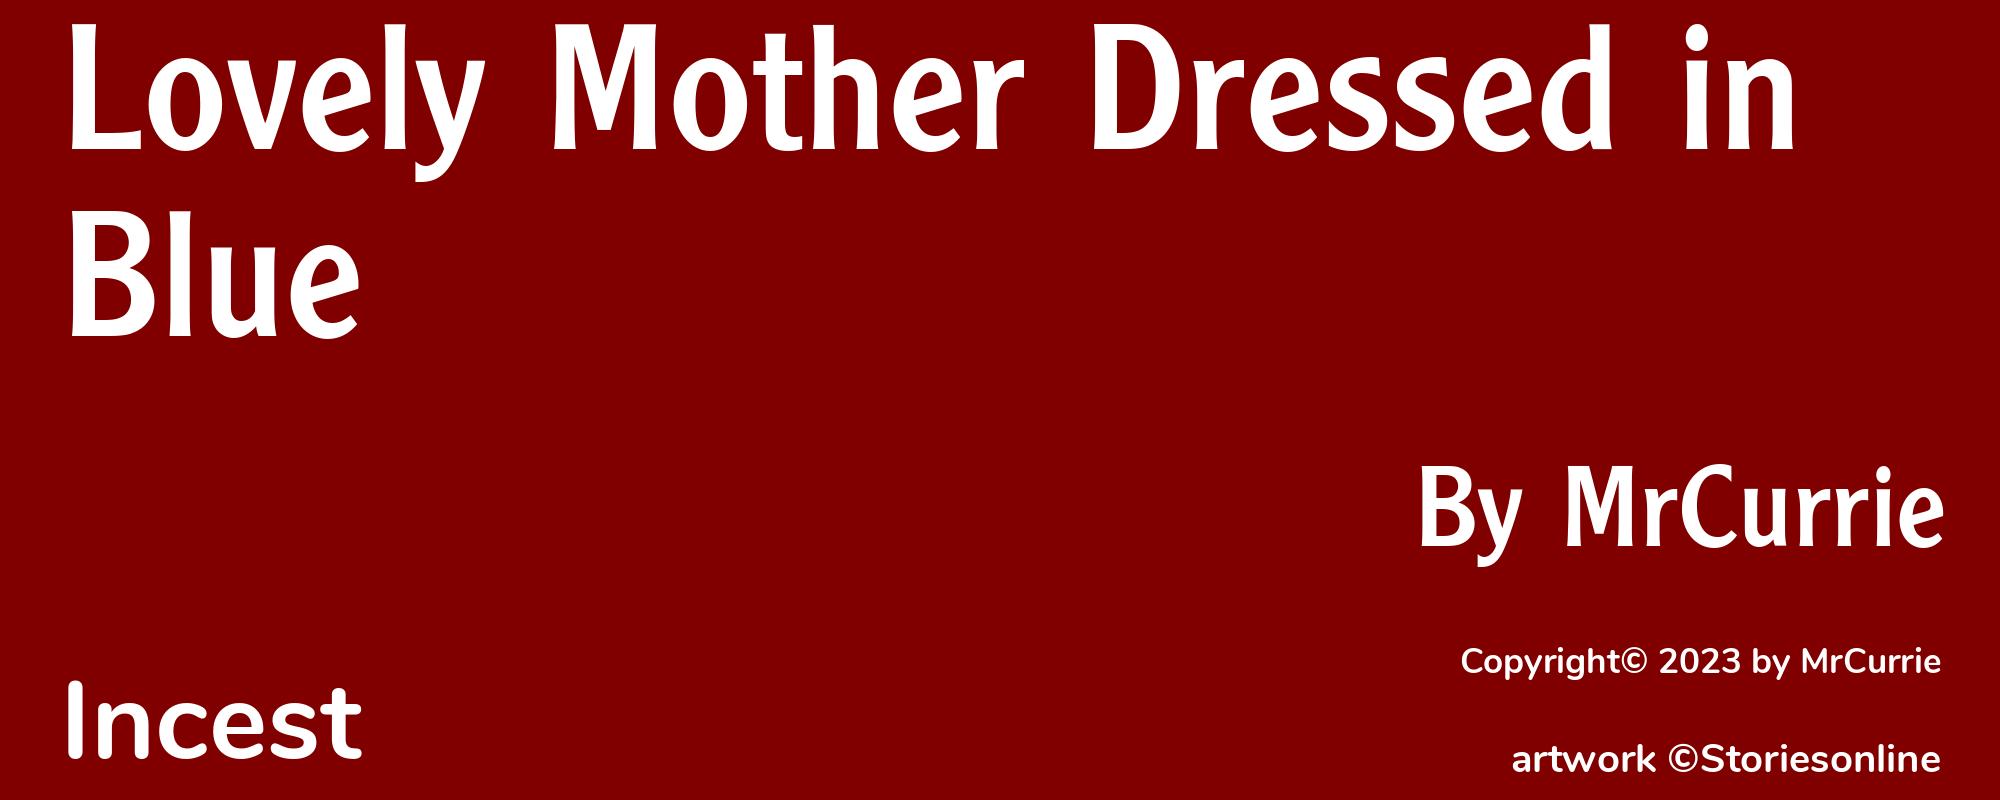 Lovely Mother Dressed in Blue - Cover